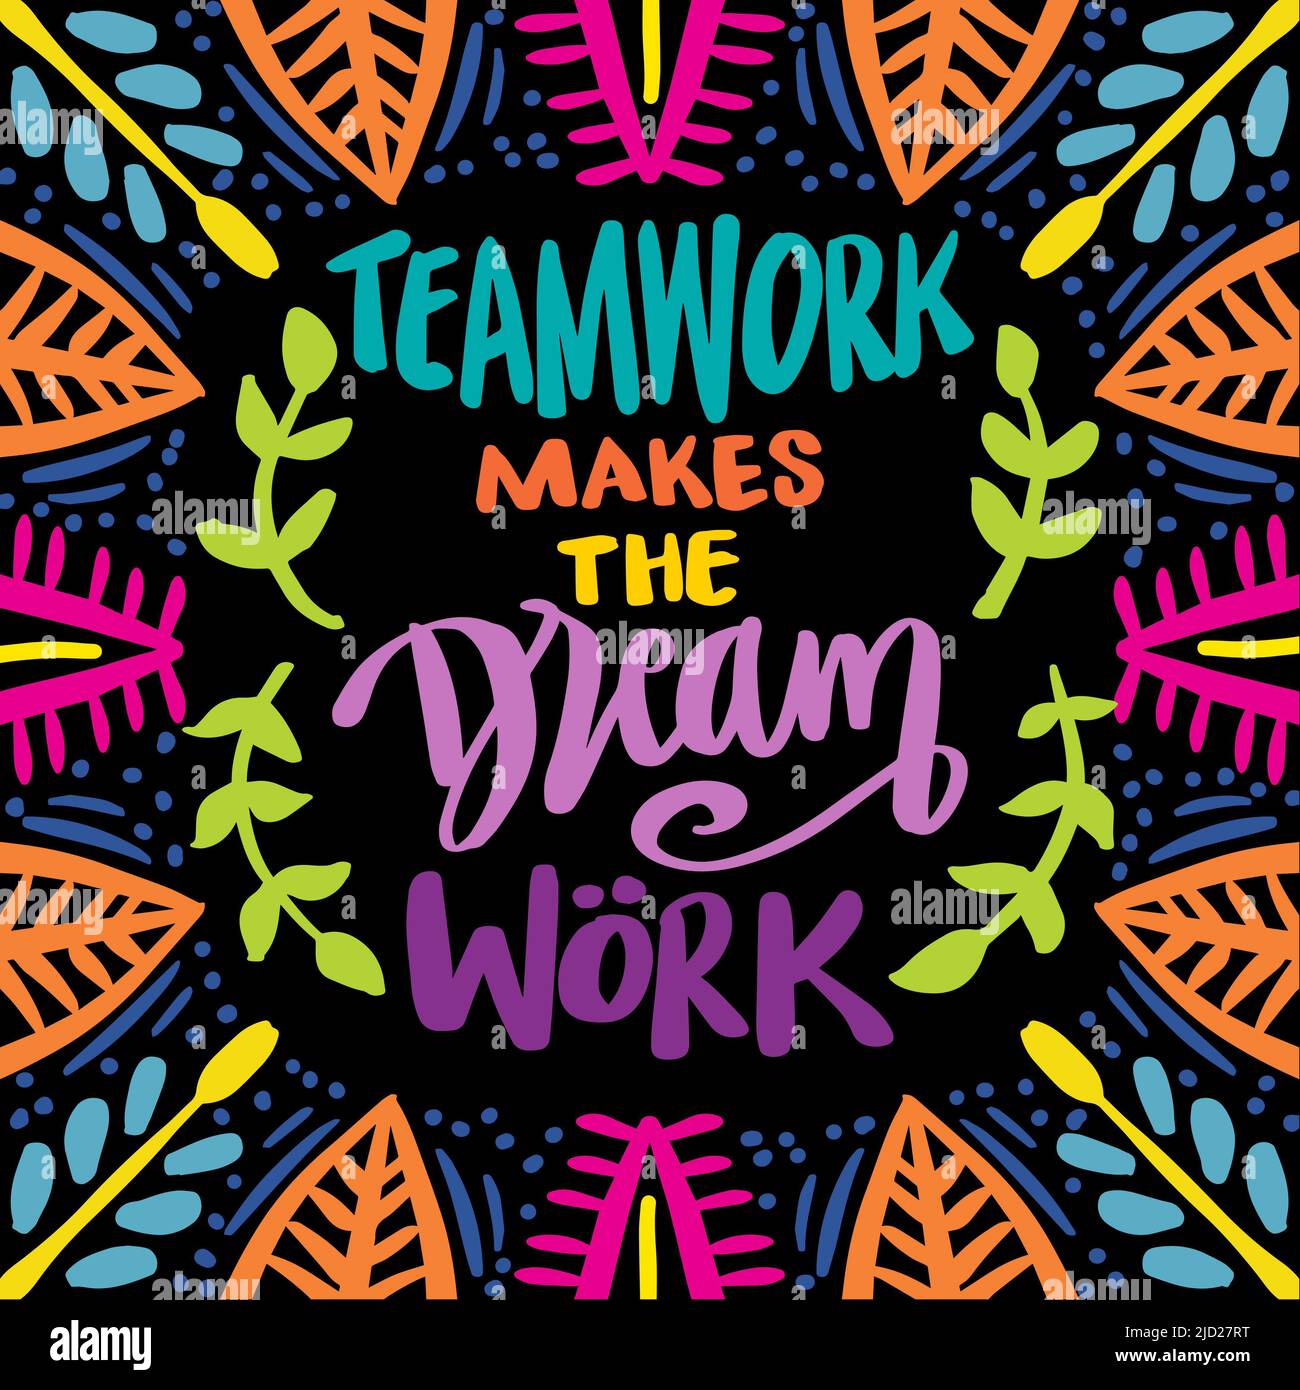 Teamwork makes the dream work. Poster quotes Stock Photo - Alamy